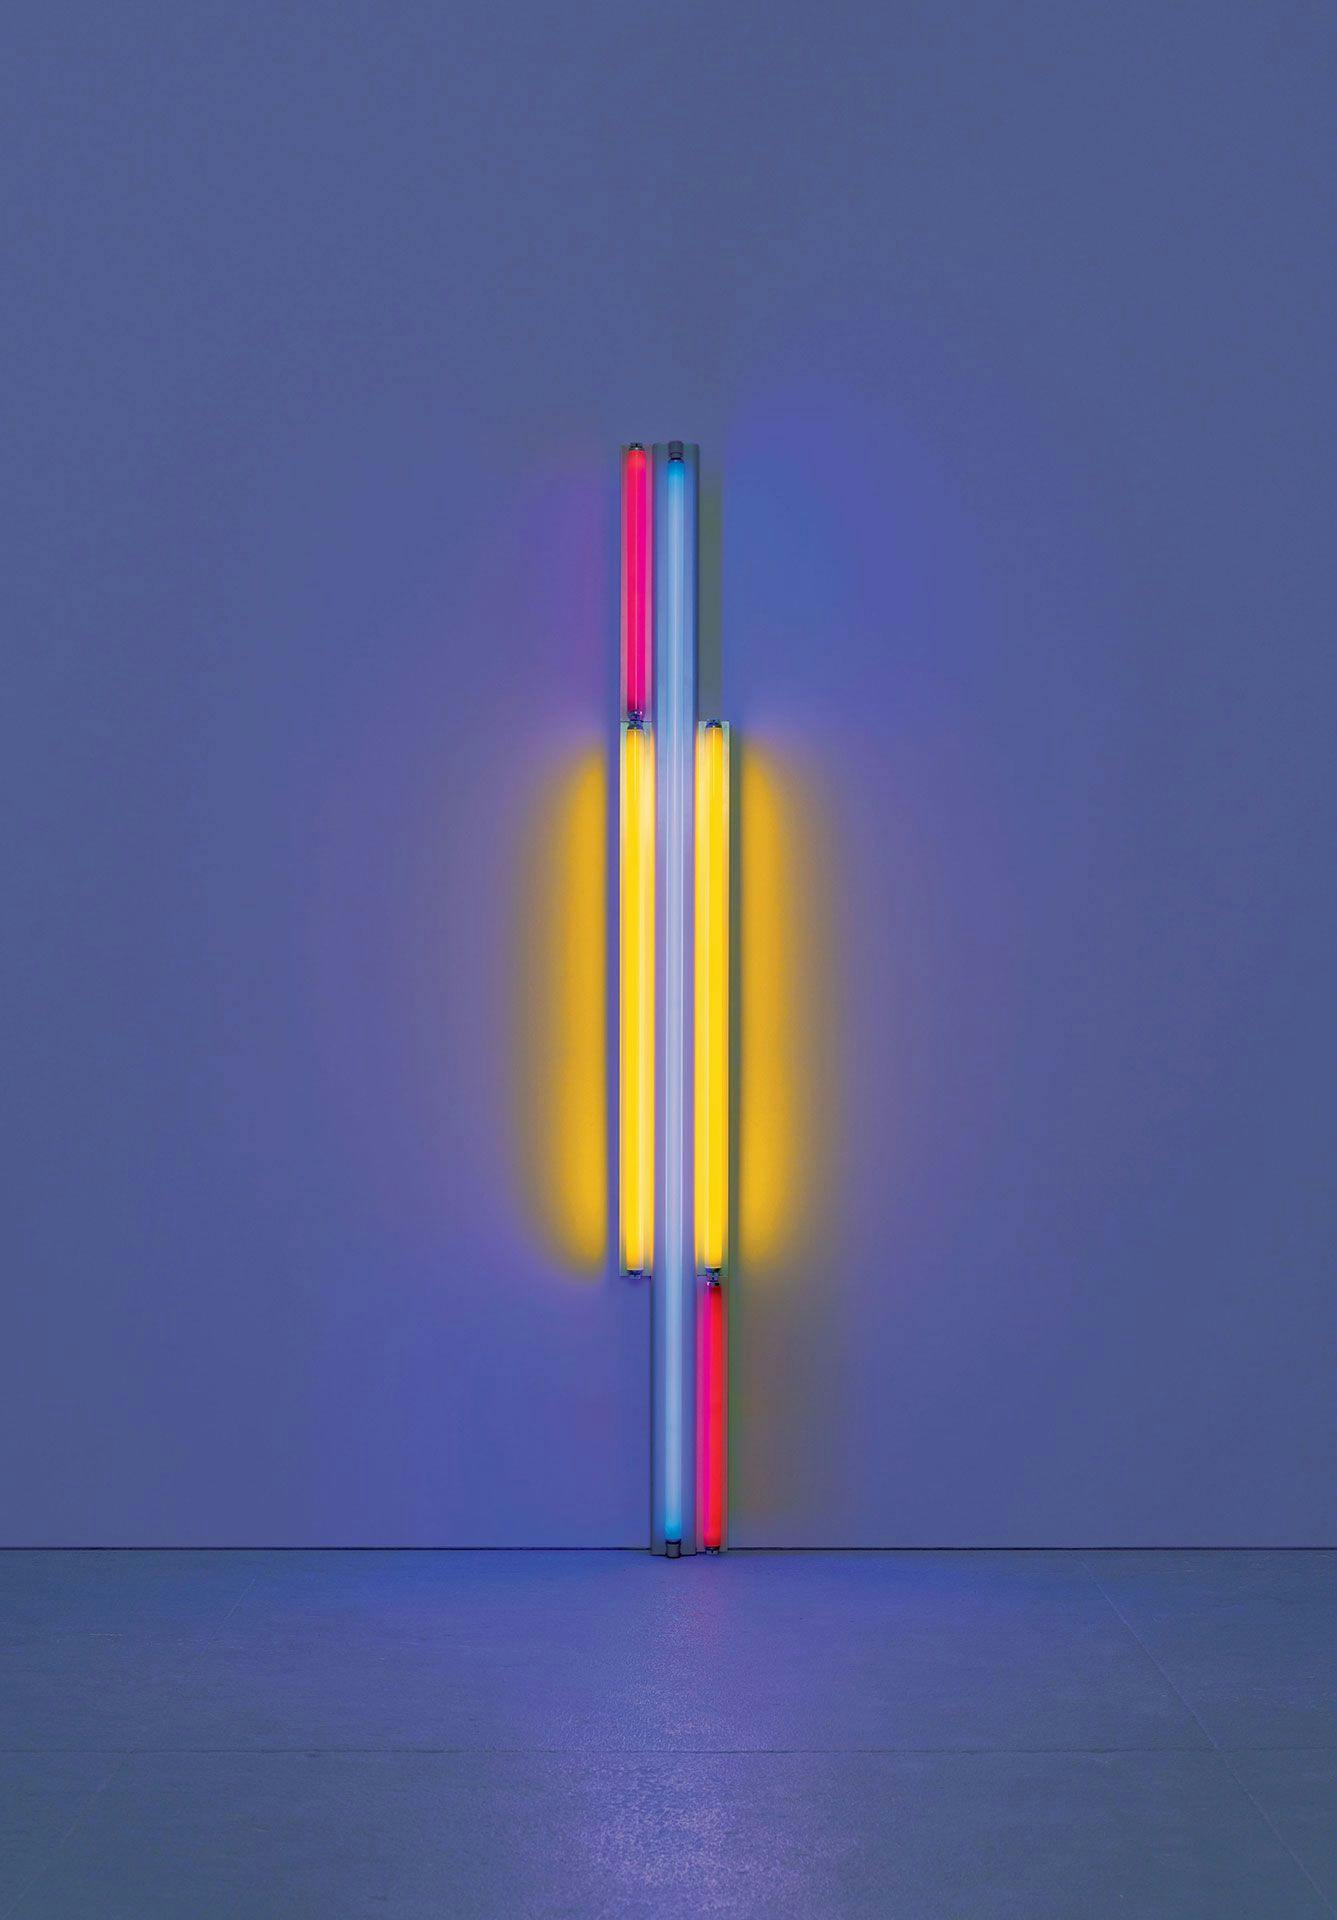 A sculpture in red, yellow, and blue fluorescent light by Dan Flavin, titled untitled (to Piet Mondrian), dated 1985.